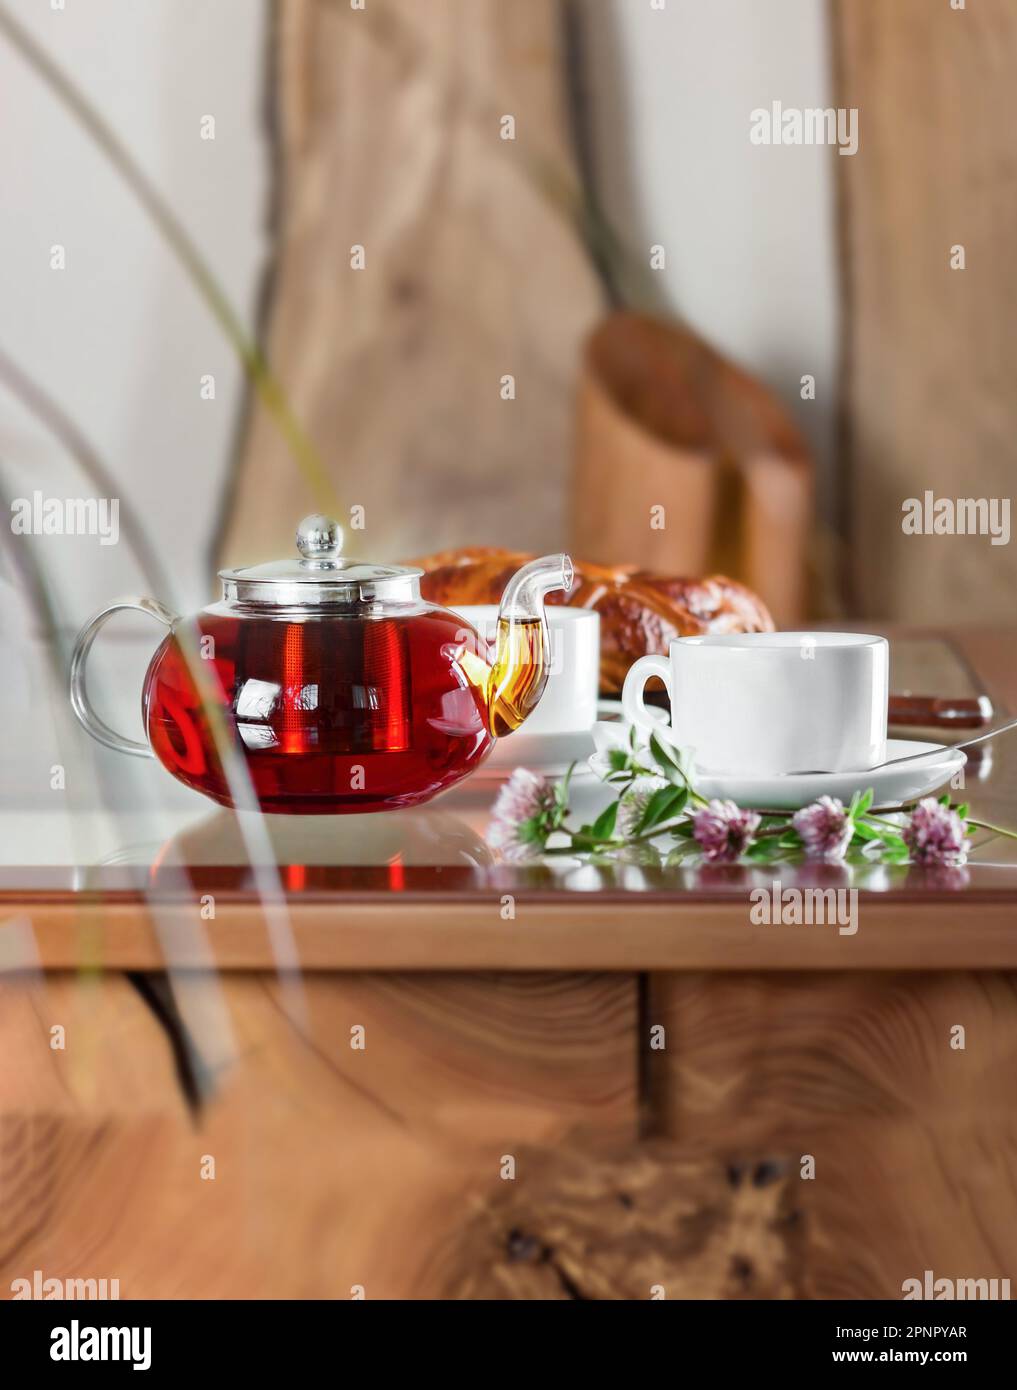 Teapot, cup and cake on the table. Stock Photo